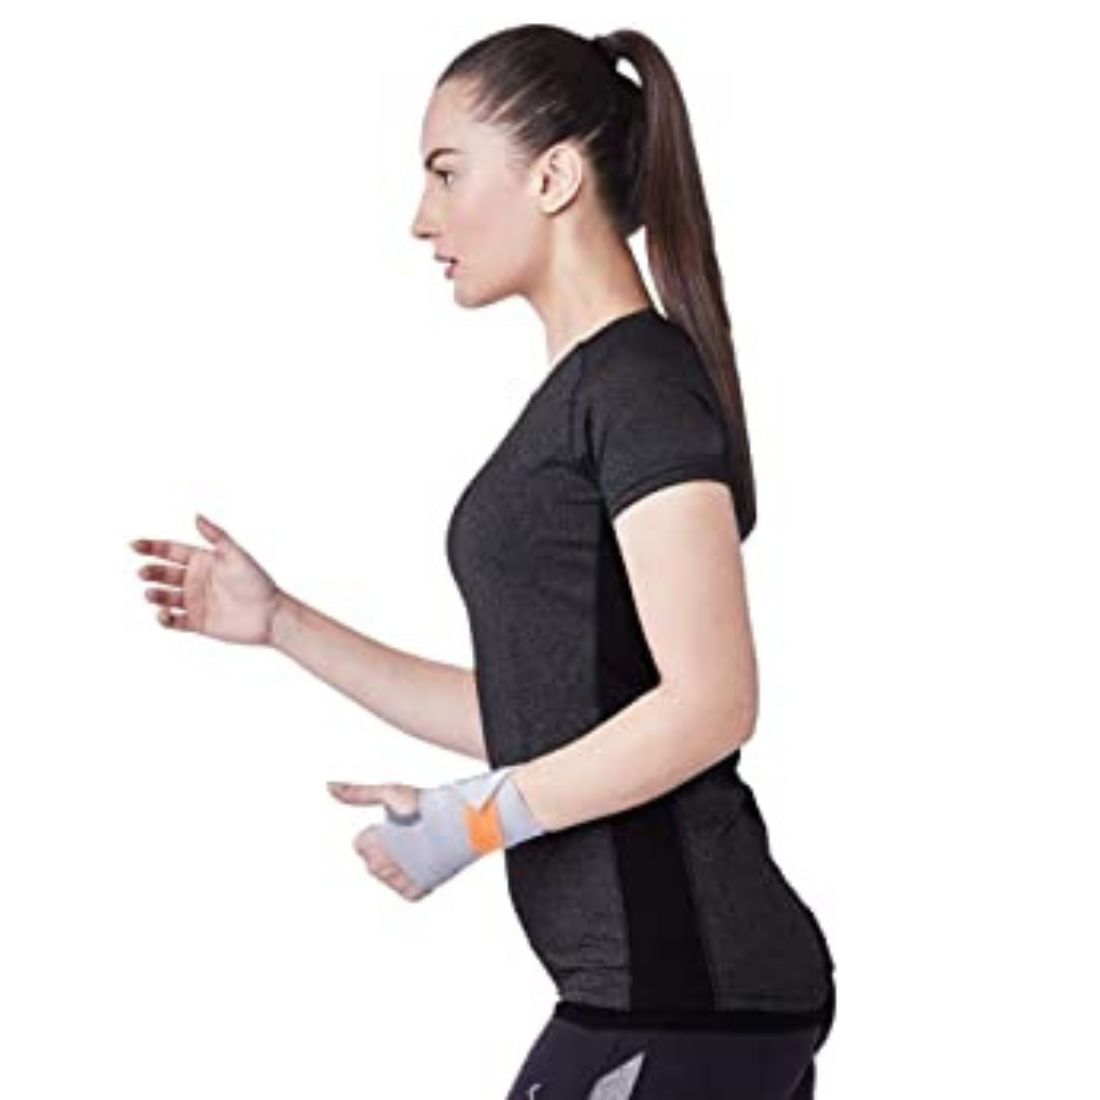 Vissco Wrist Supports are for people who need protection and support for painful, swollen, or weak joints